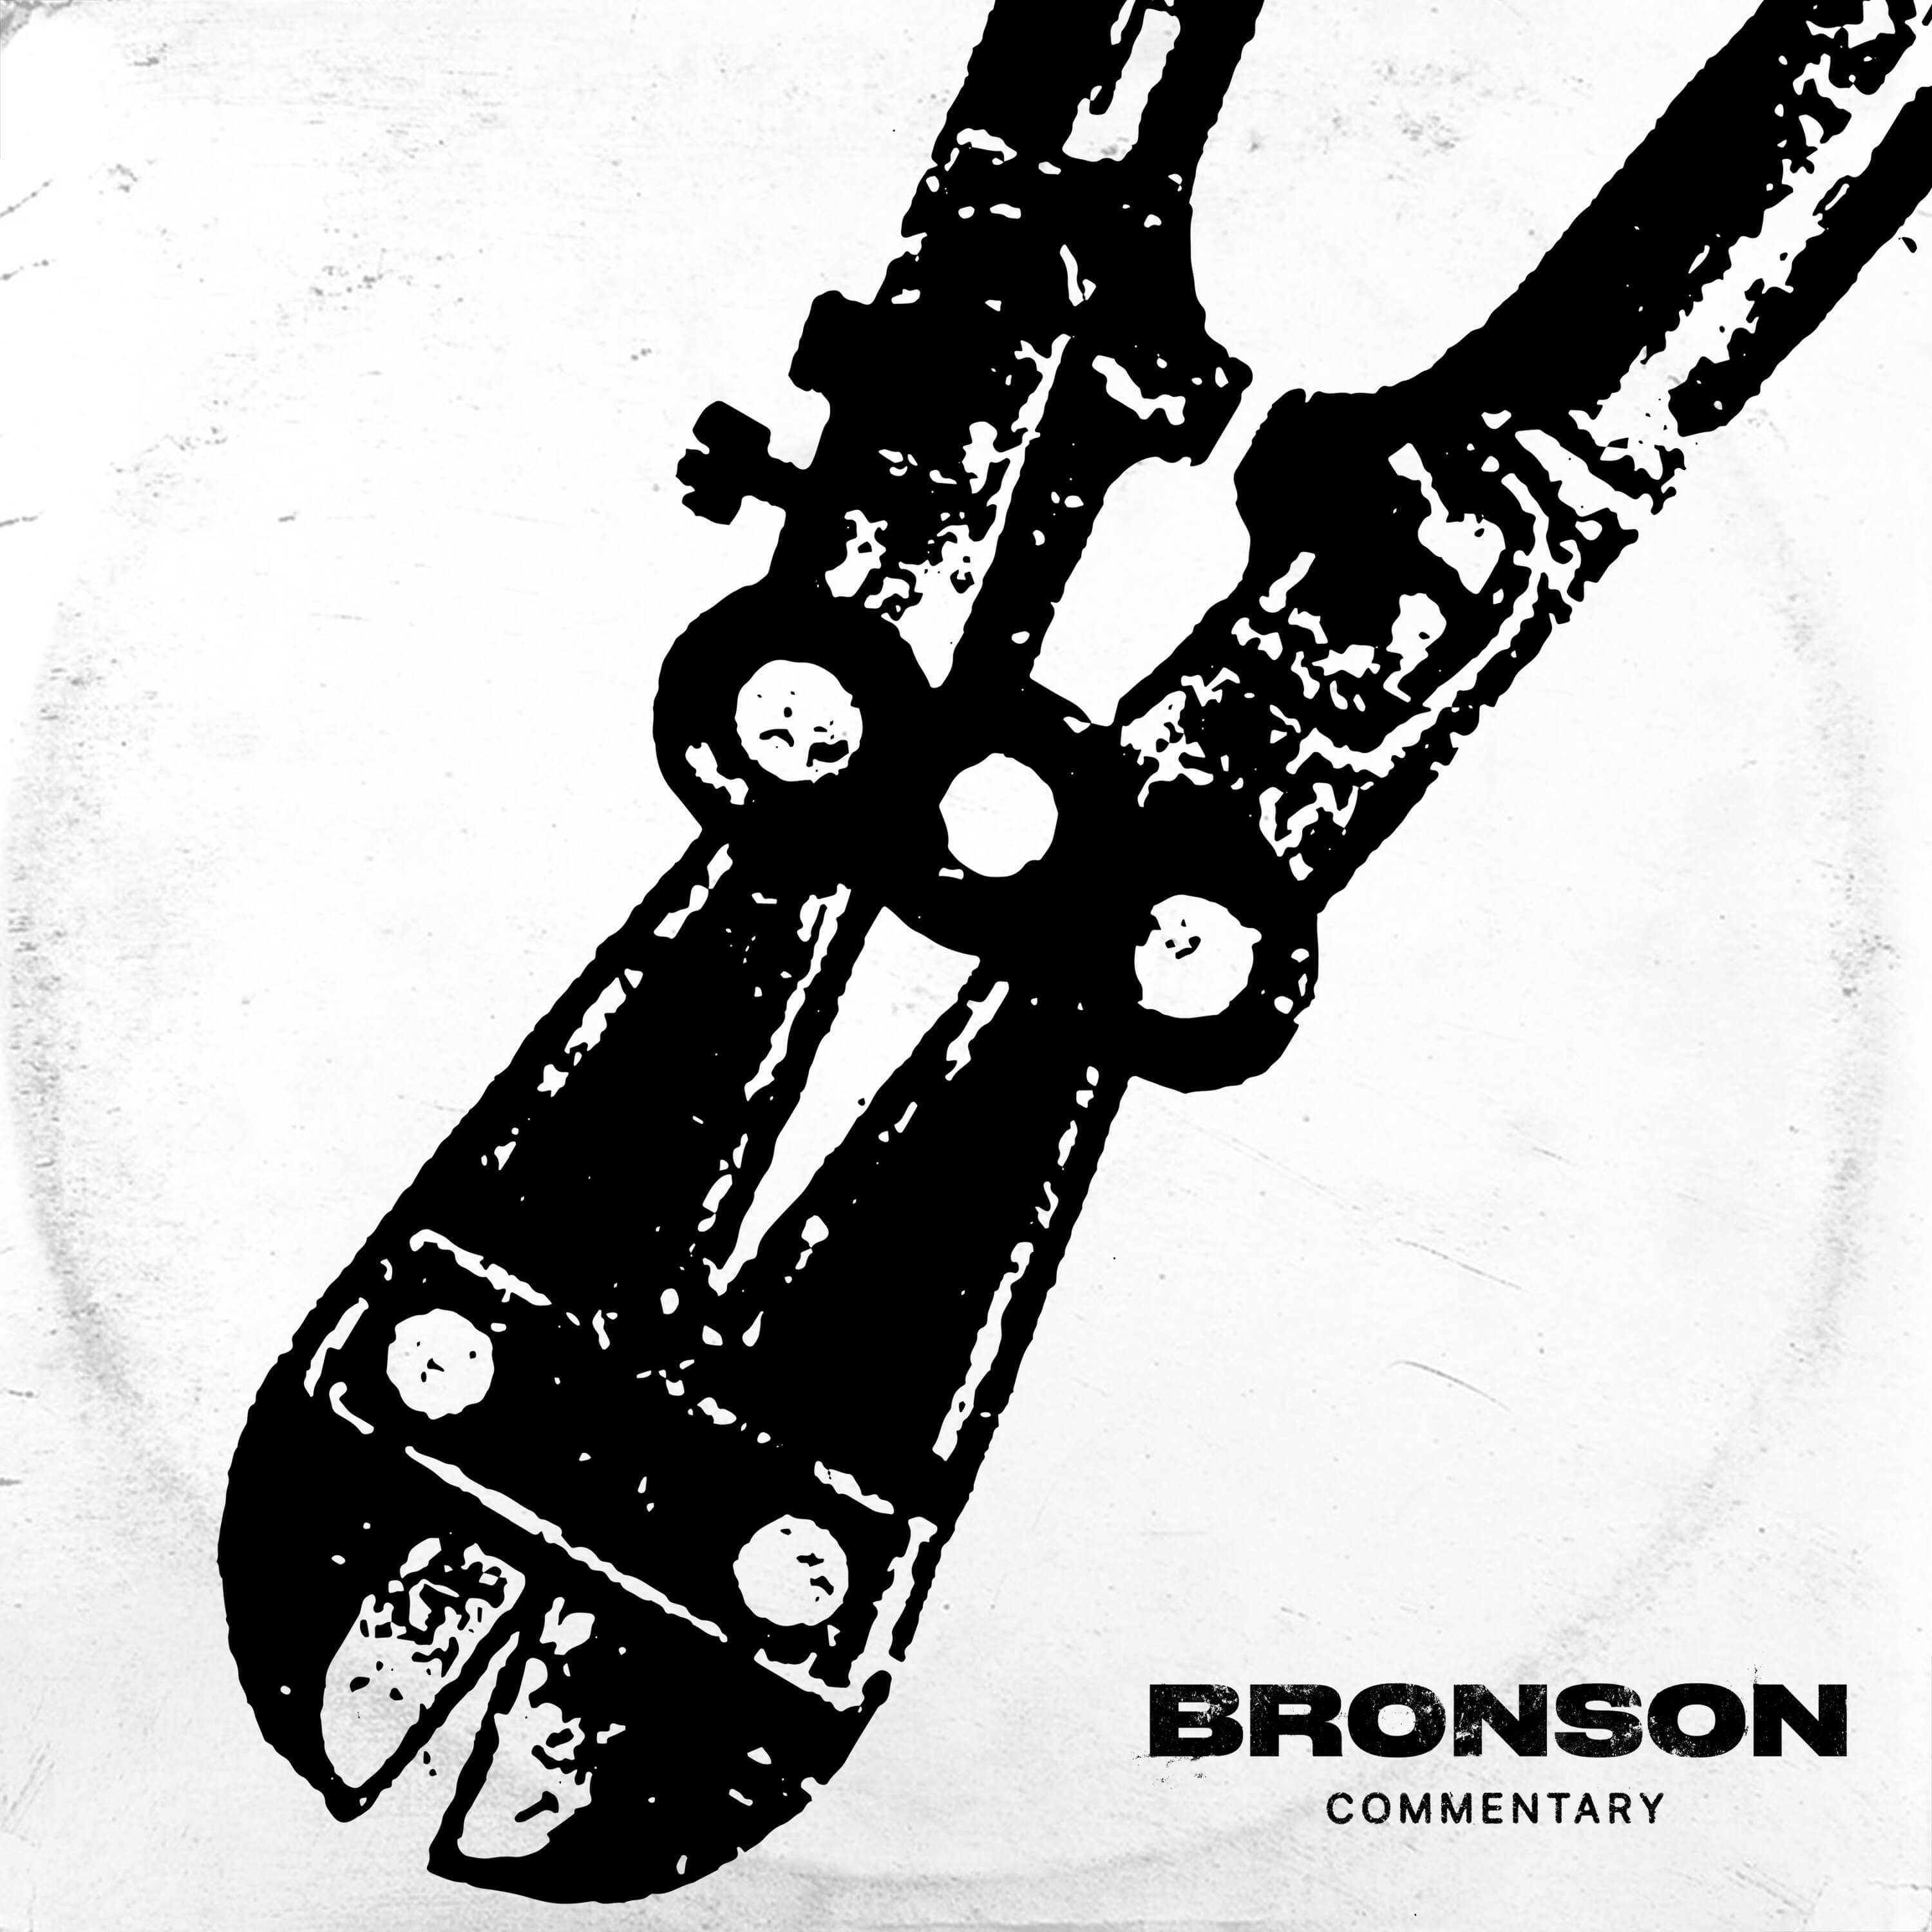 BRONSON Gives In-Depth Look of Debut Album with Commentary